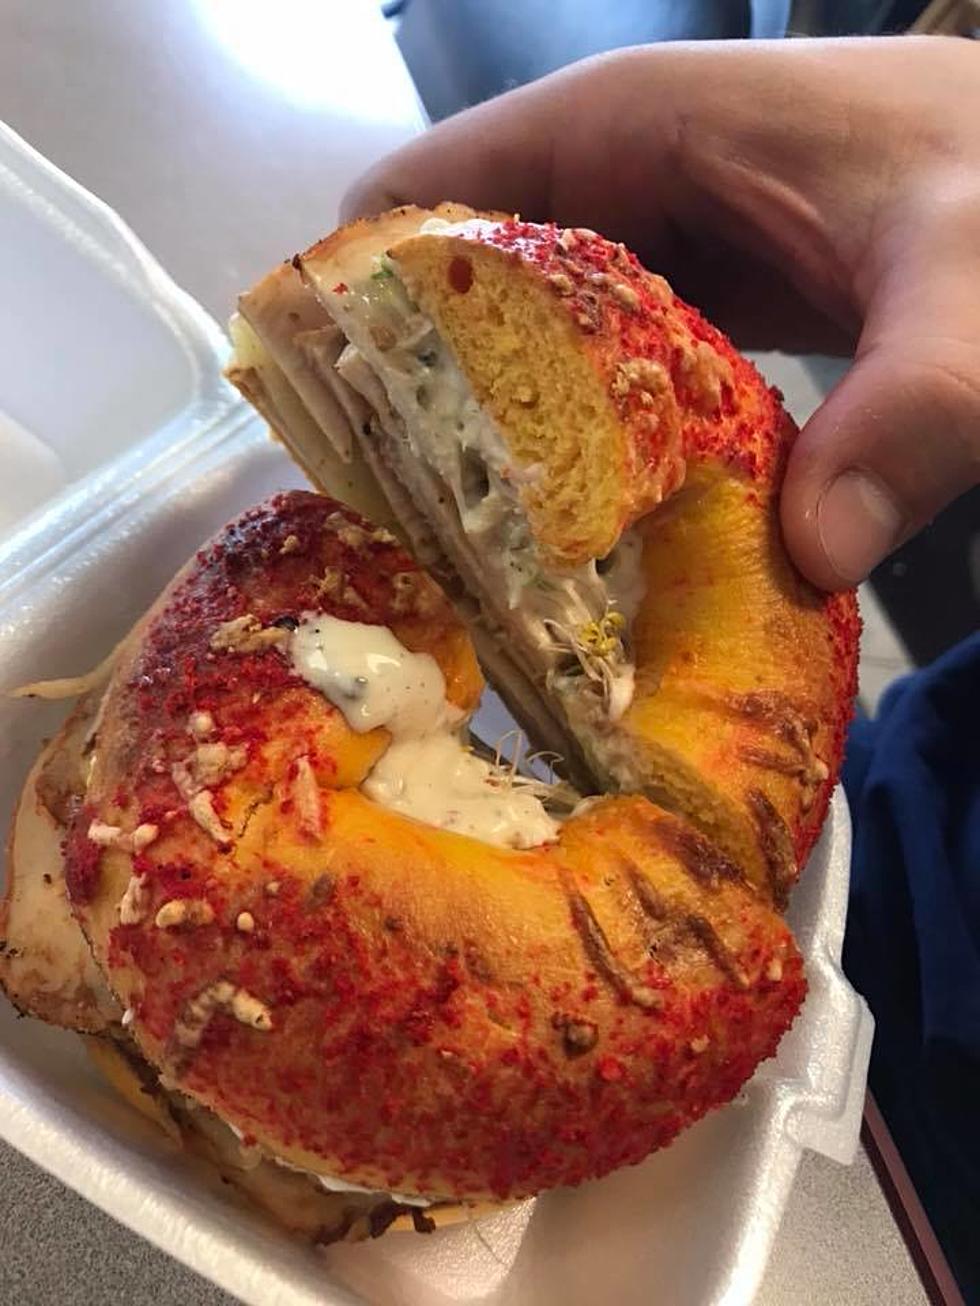 You Can Now Buy a Flaming Hot Cheetos Bagel in Amarillo